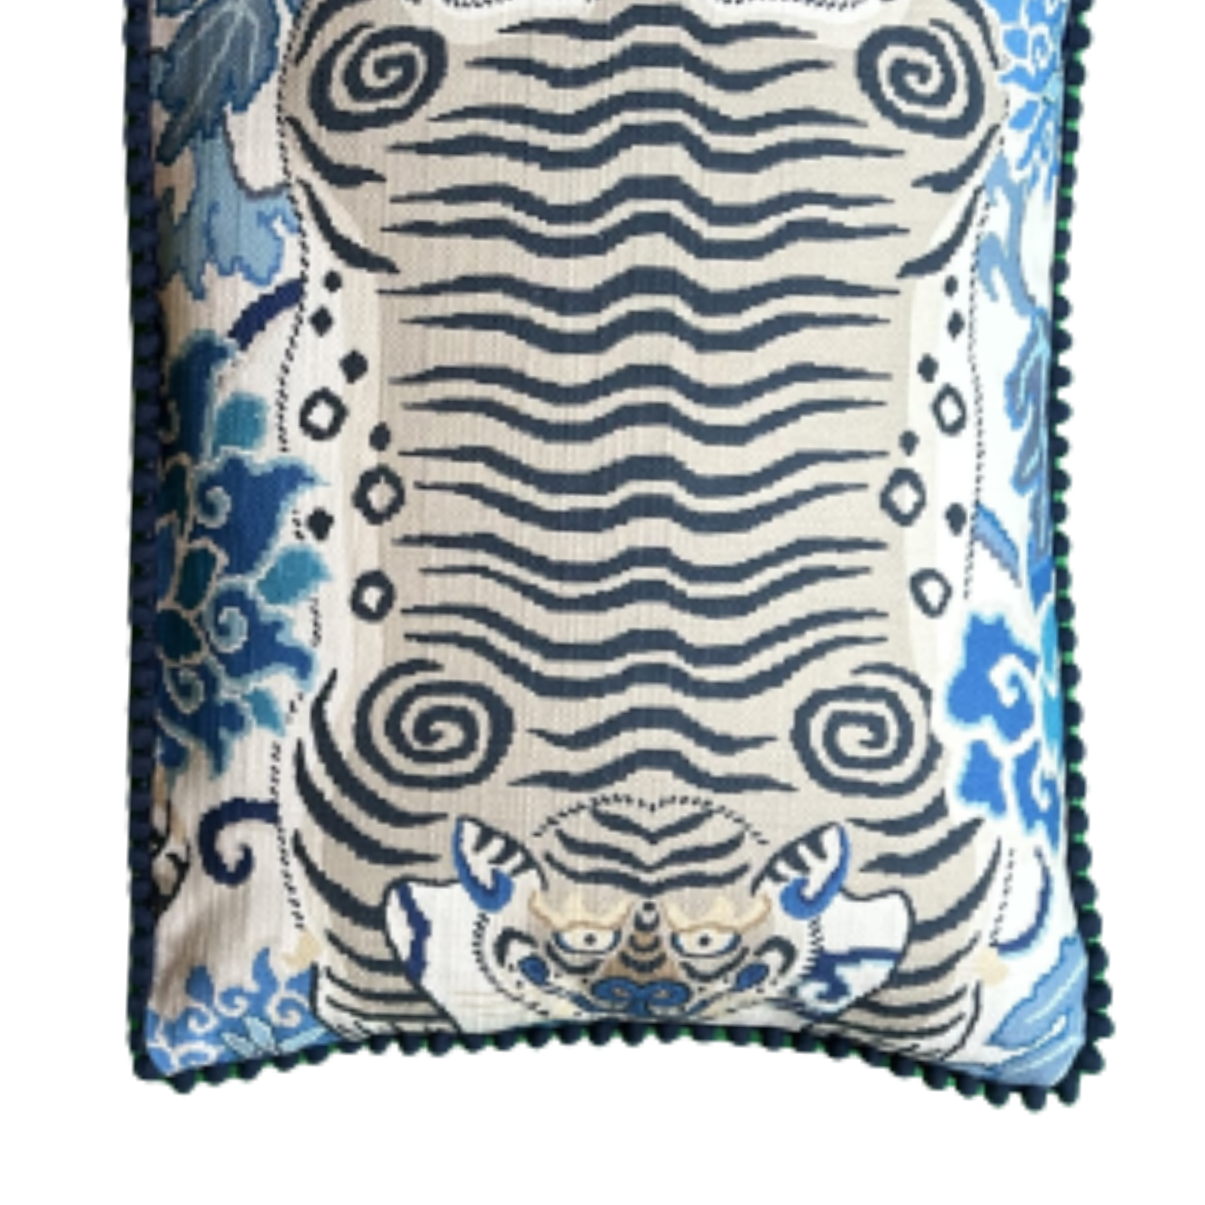 Blue Moon Tiger 16 x 22 Decorative Throw Pillow with Down Feather Insert